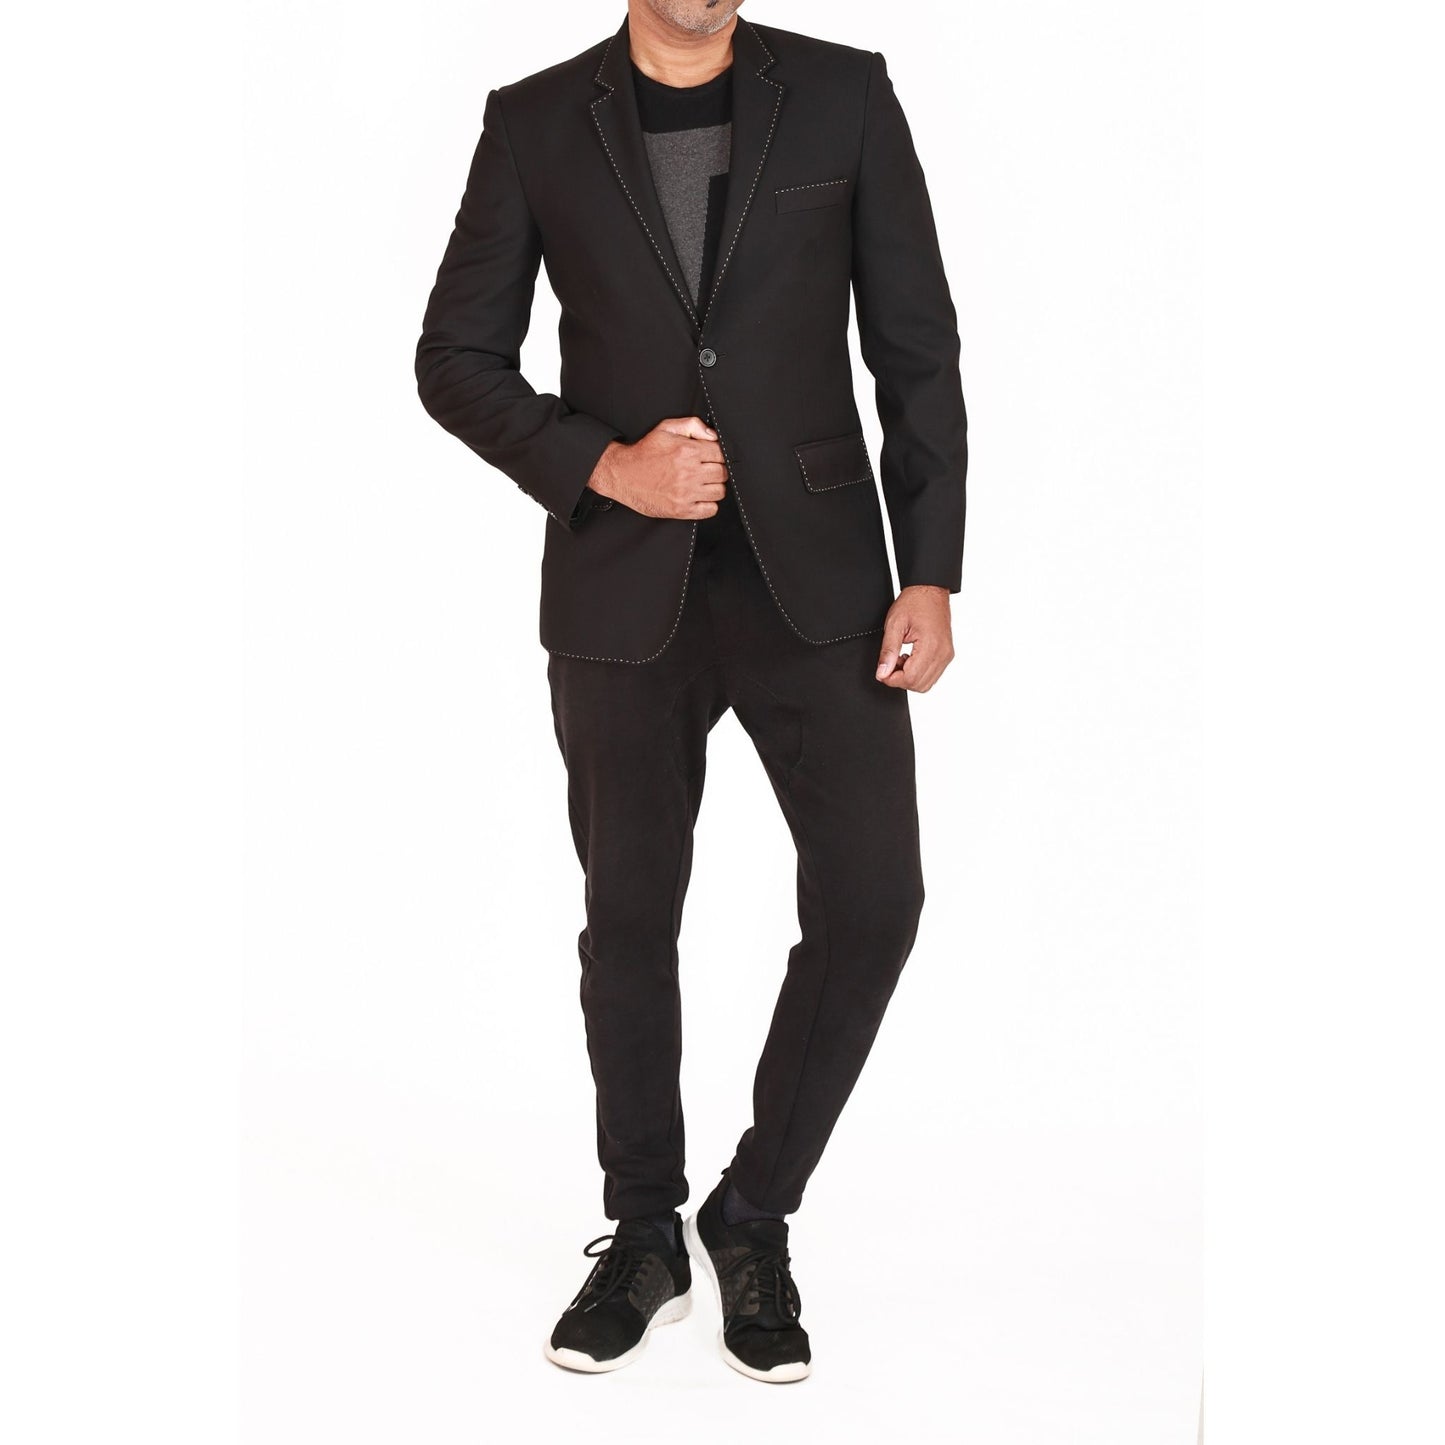 Single breasted jacket with handstitch detail at edges & slimfit flatfront trousers